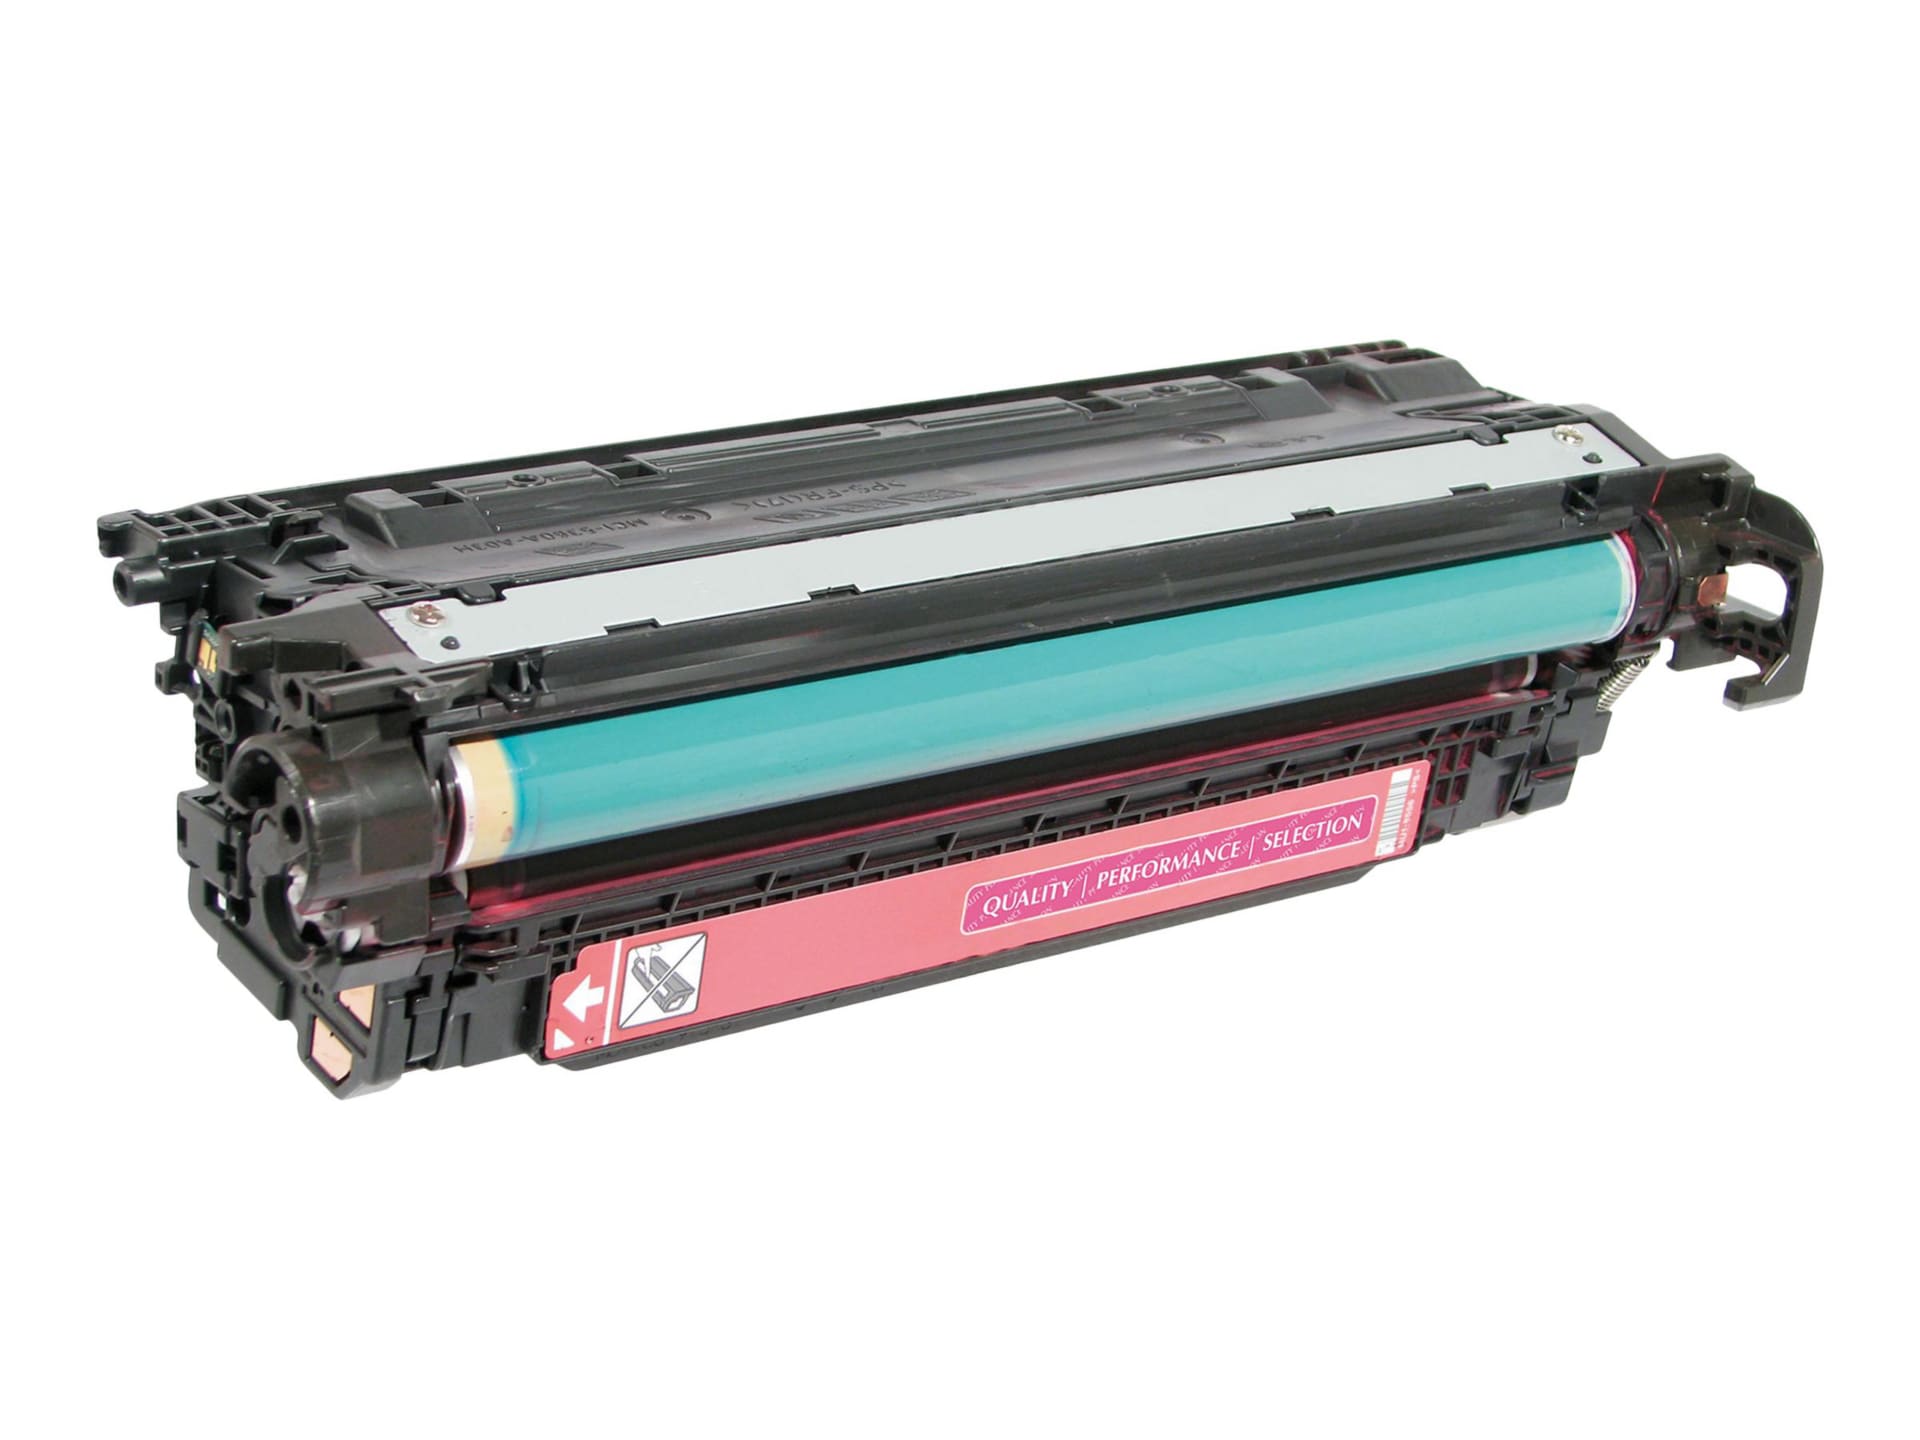 Clover Remanufactured Toner for HP CE403A (507A), Magenta, 6,000 page yield